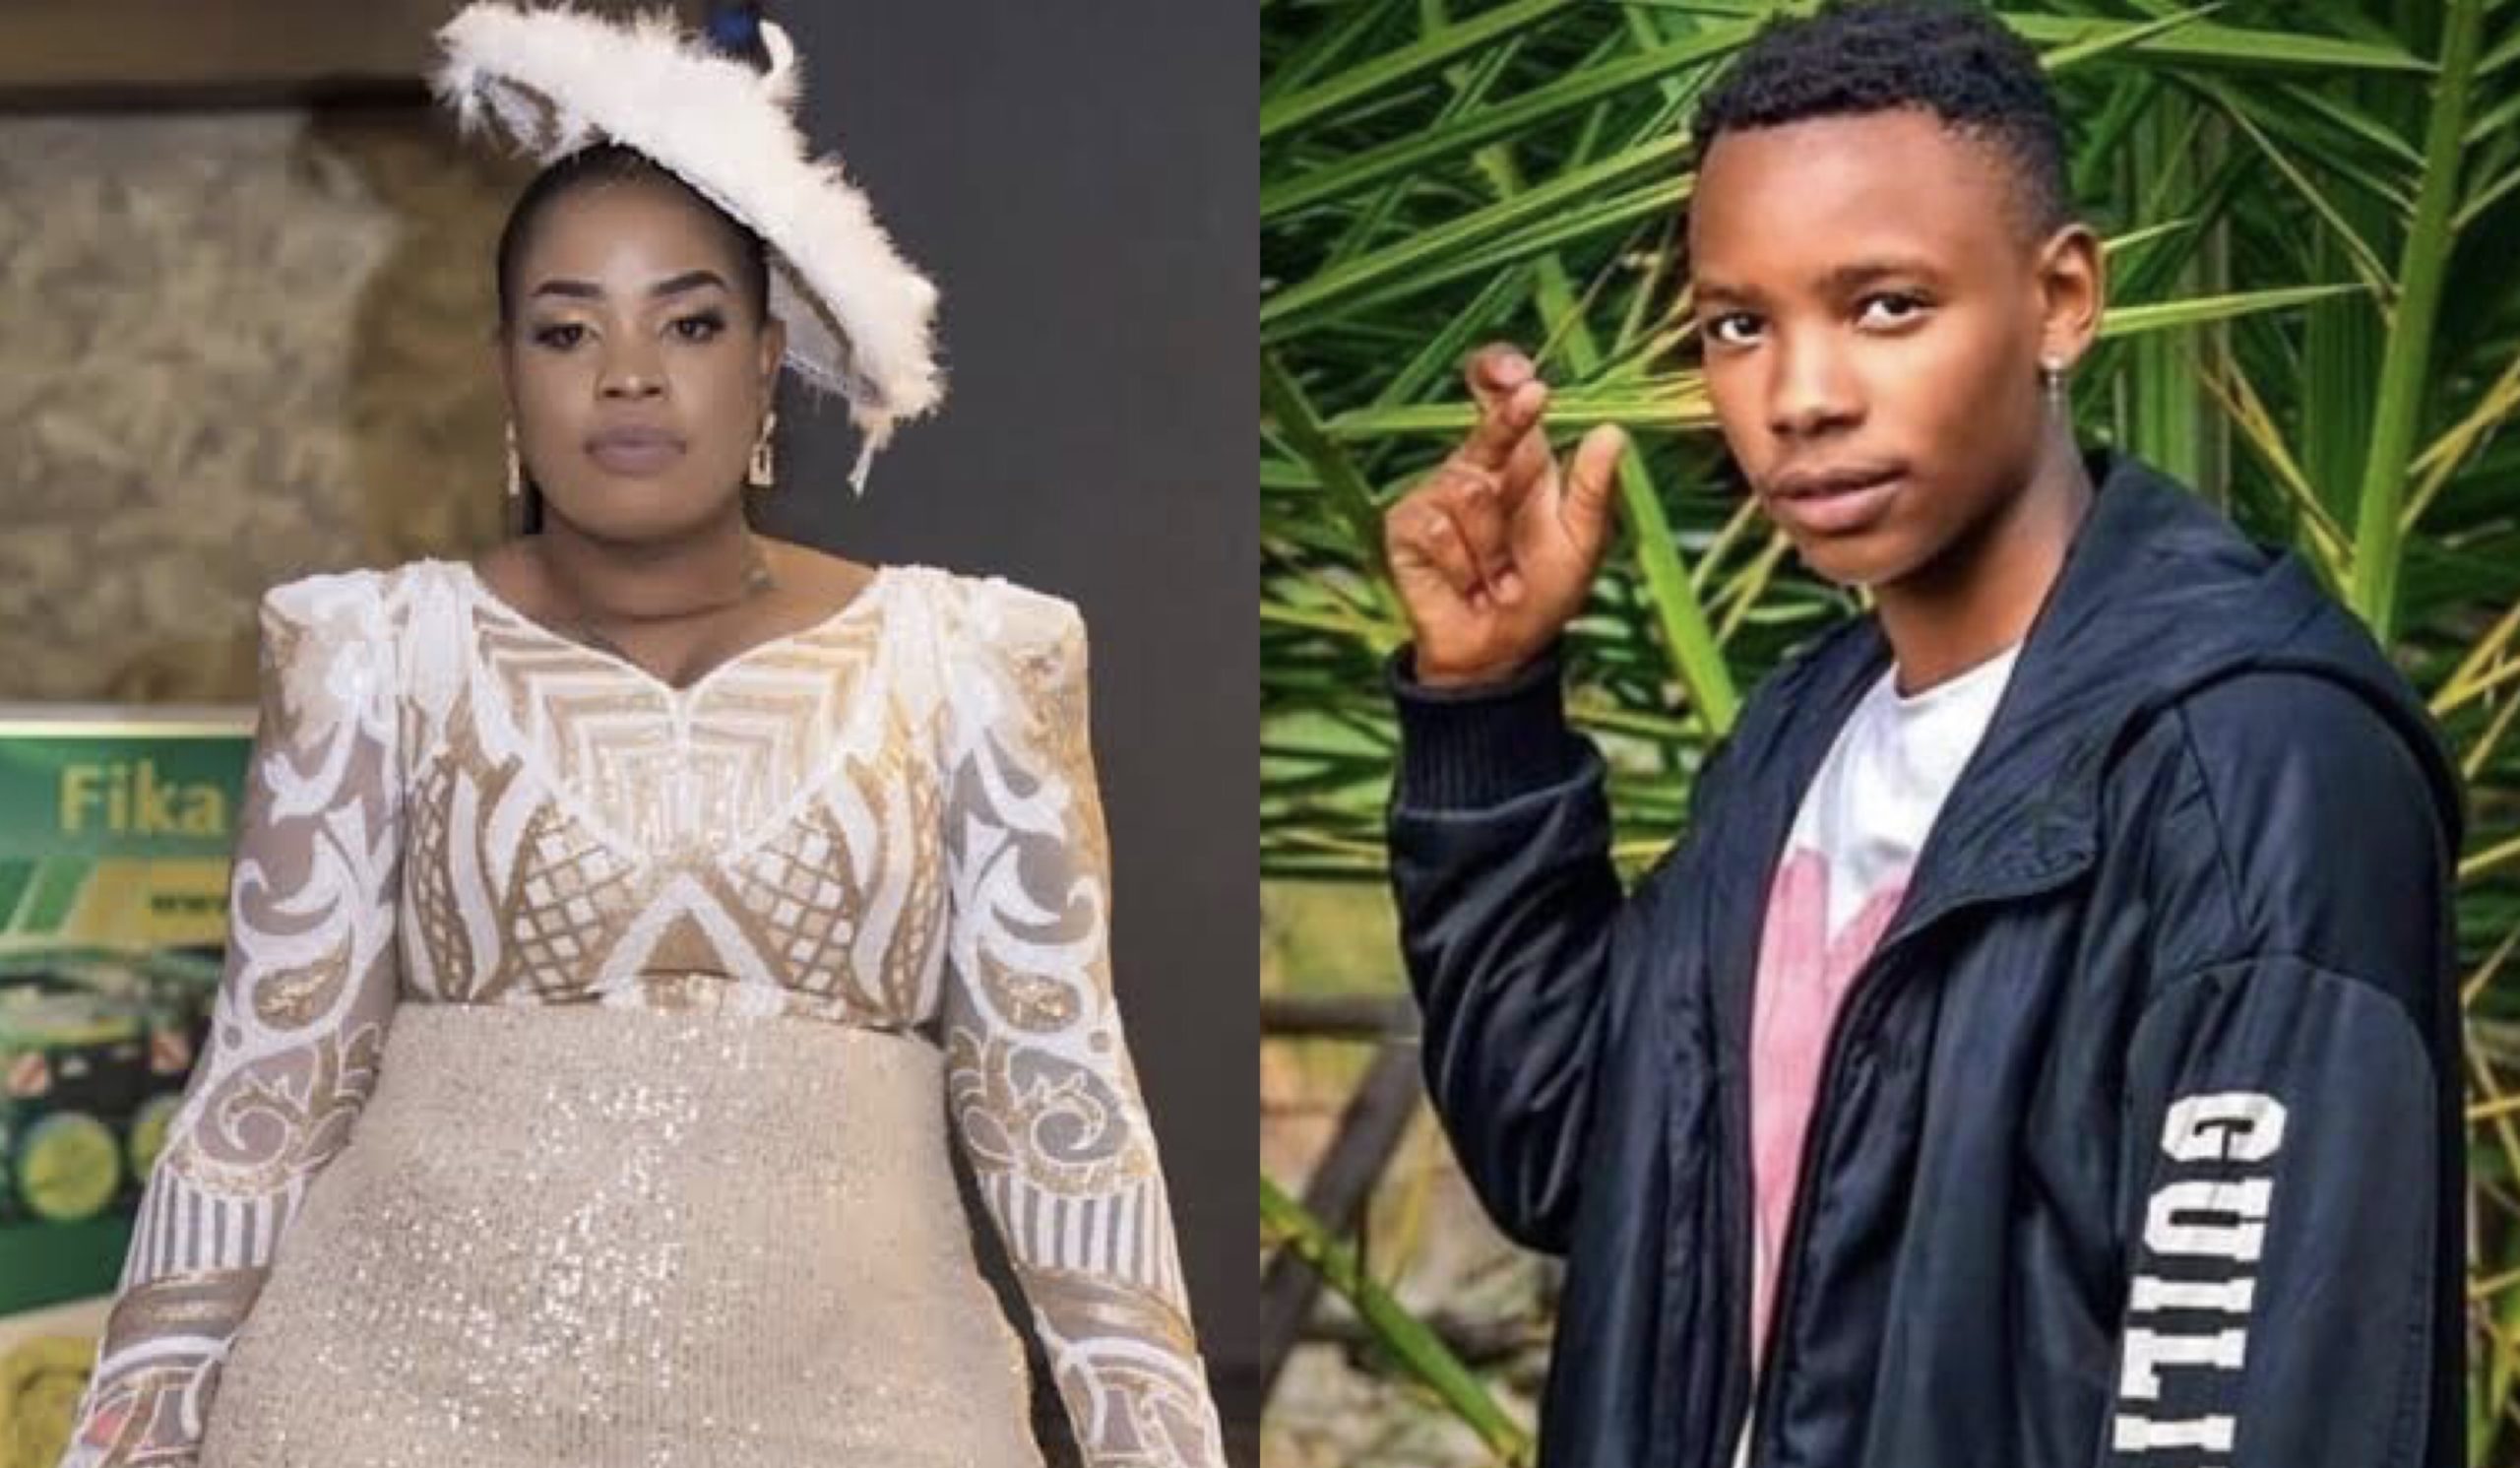 “My life is in danger!” Boy cries after allegedly receiving threats from Bridget Achieng over the #JusticeForShanty